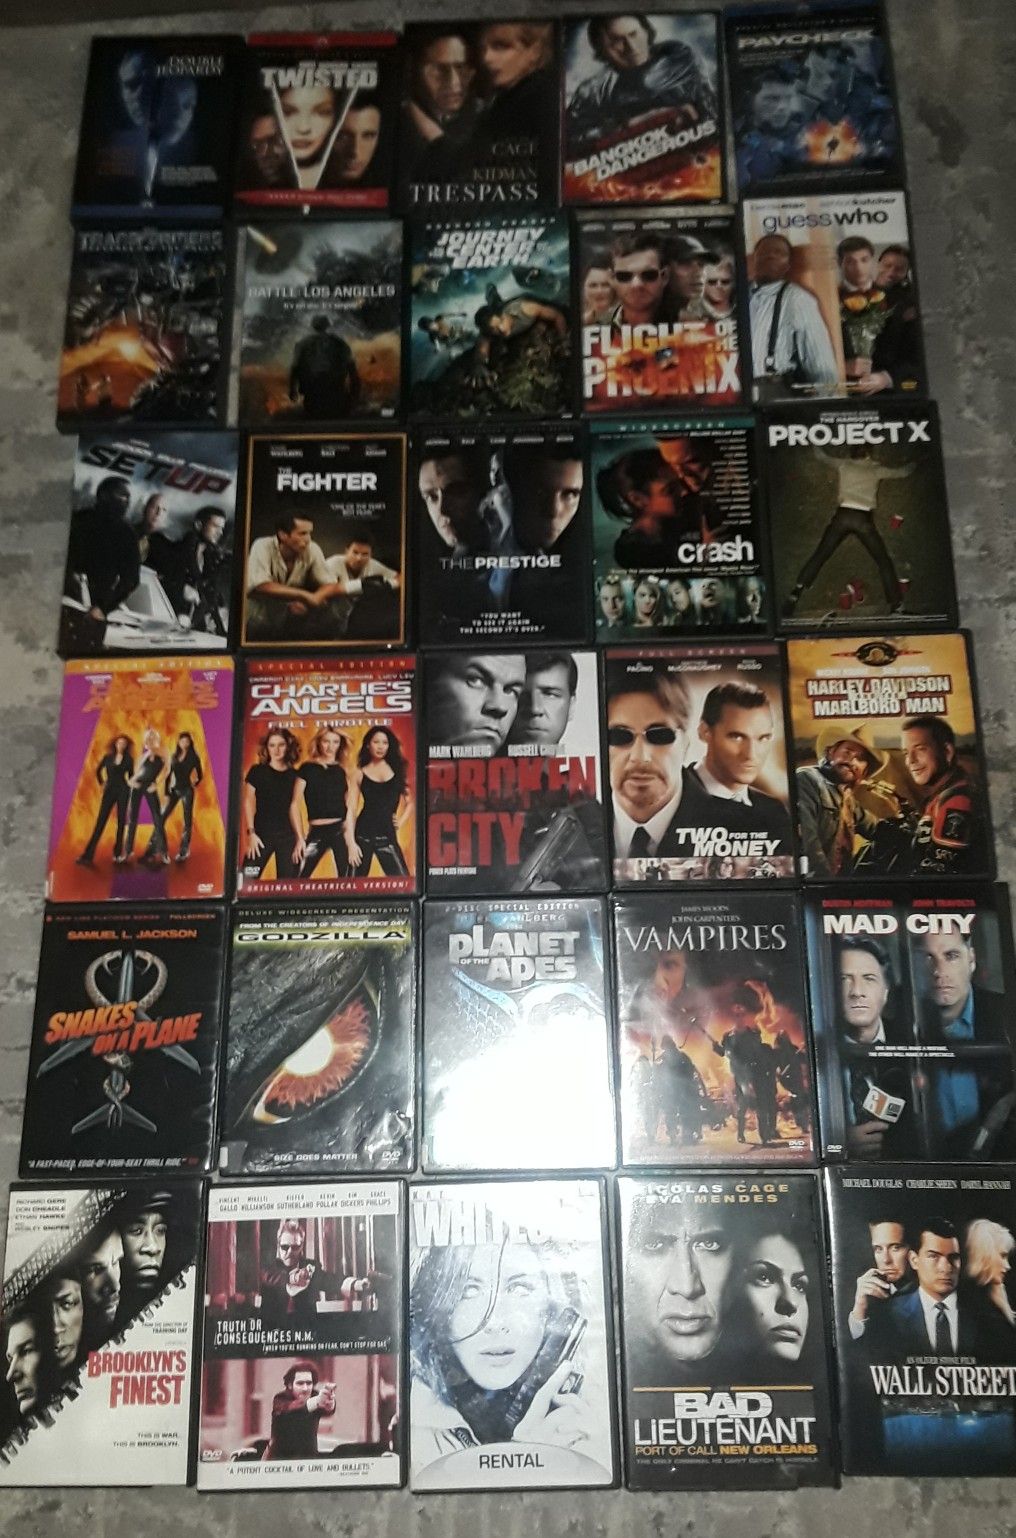 30 DVD 's for $25